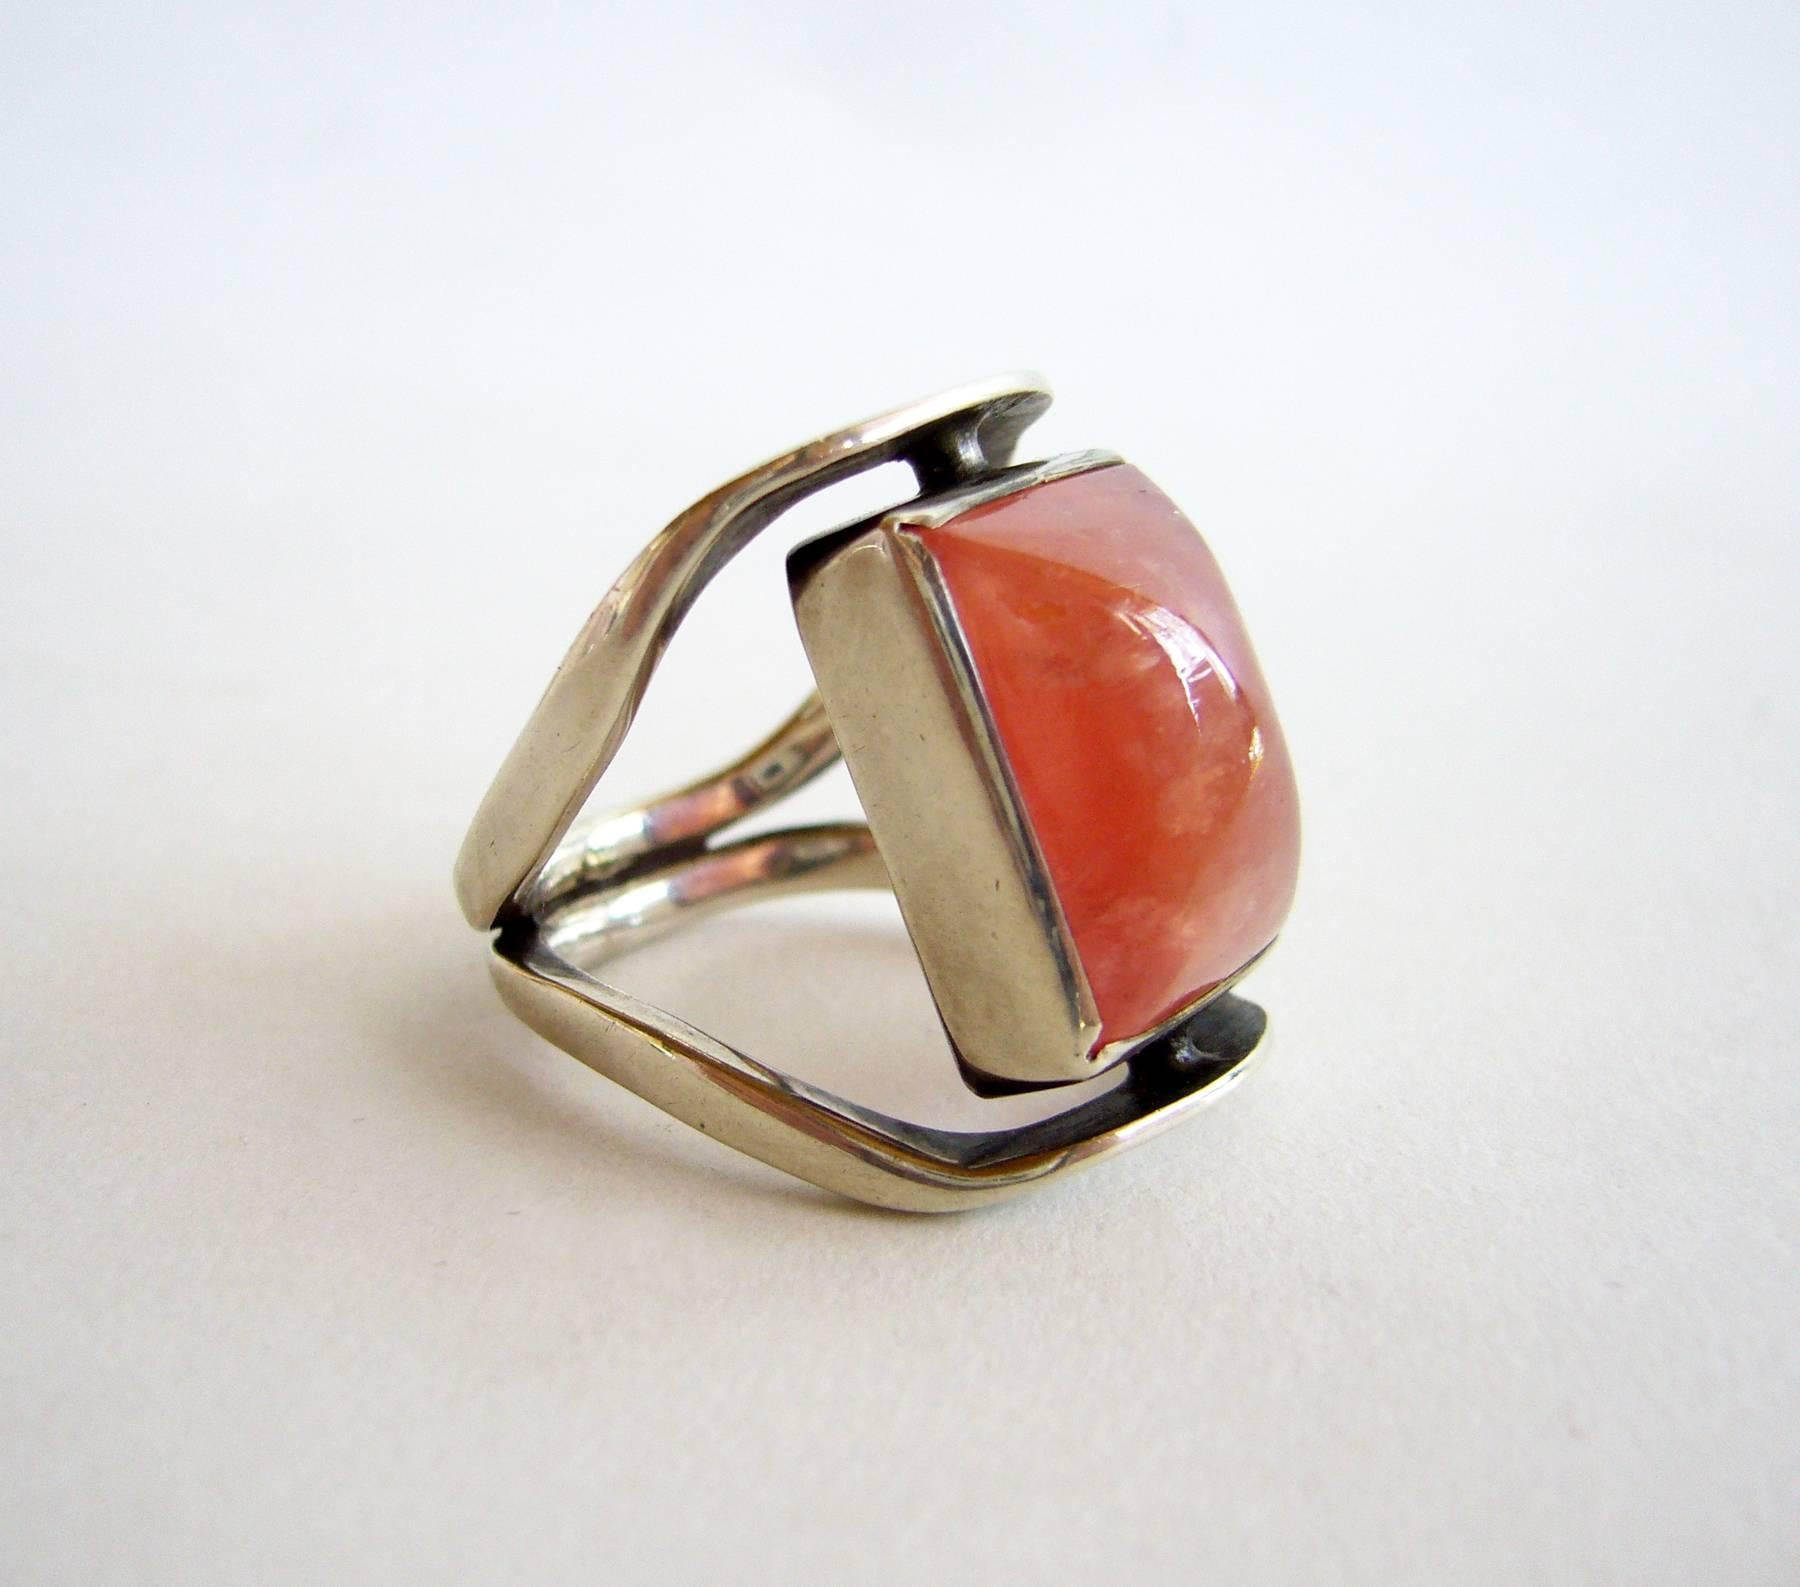 Sterling silver and fall color rhodochrosite ring created by Jack Nutting of San Francisco, California.   Ring is unsigned and a finger size 6.5 - 6.75.  From the estate of the artist, Jack Nutting.  In excellent vintage condition. 

Nutting joined